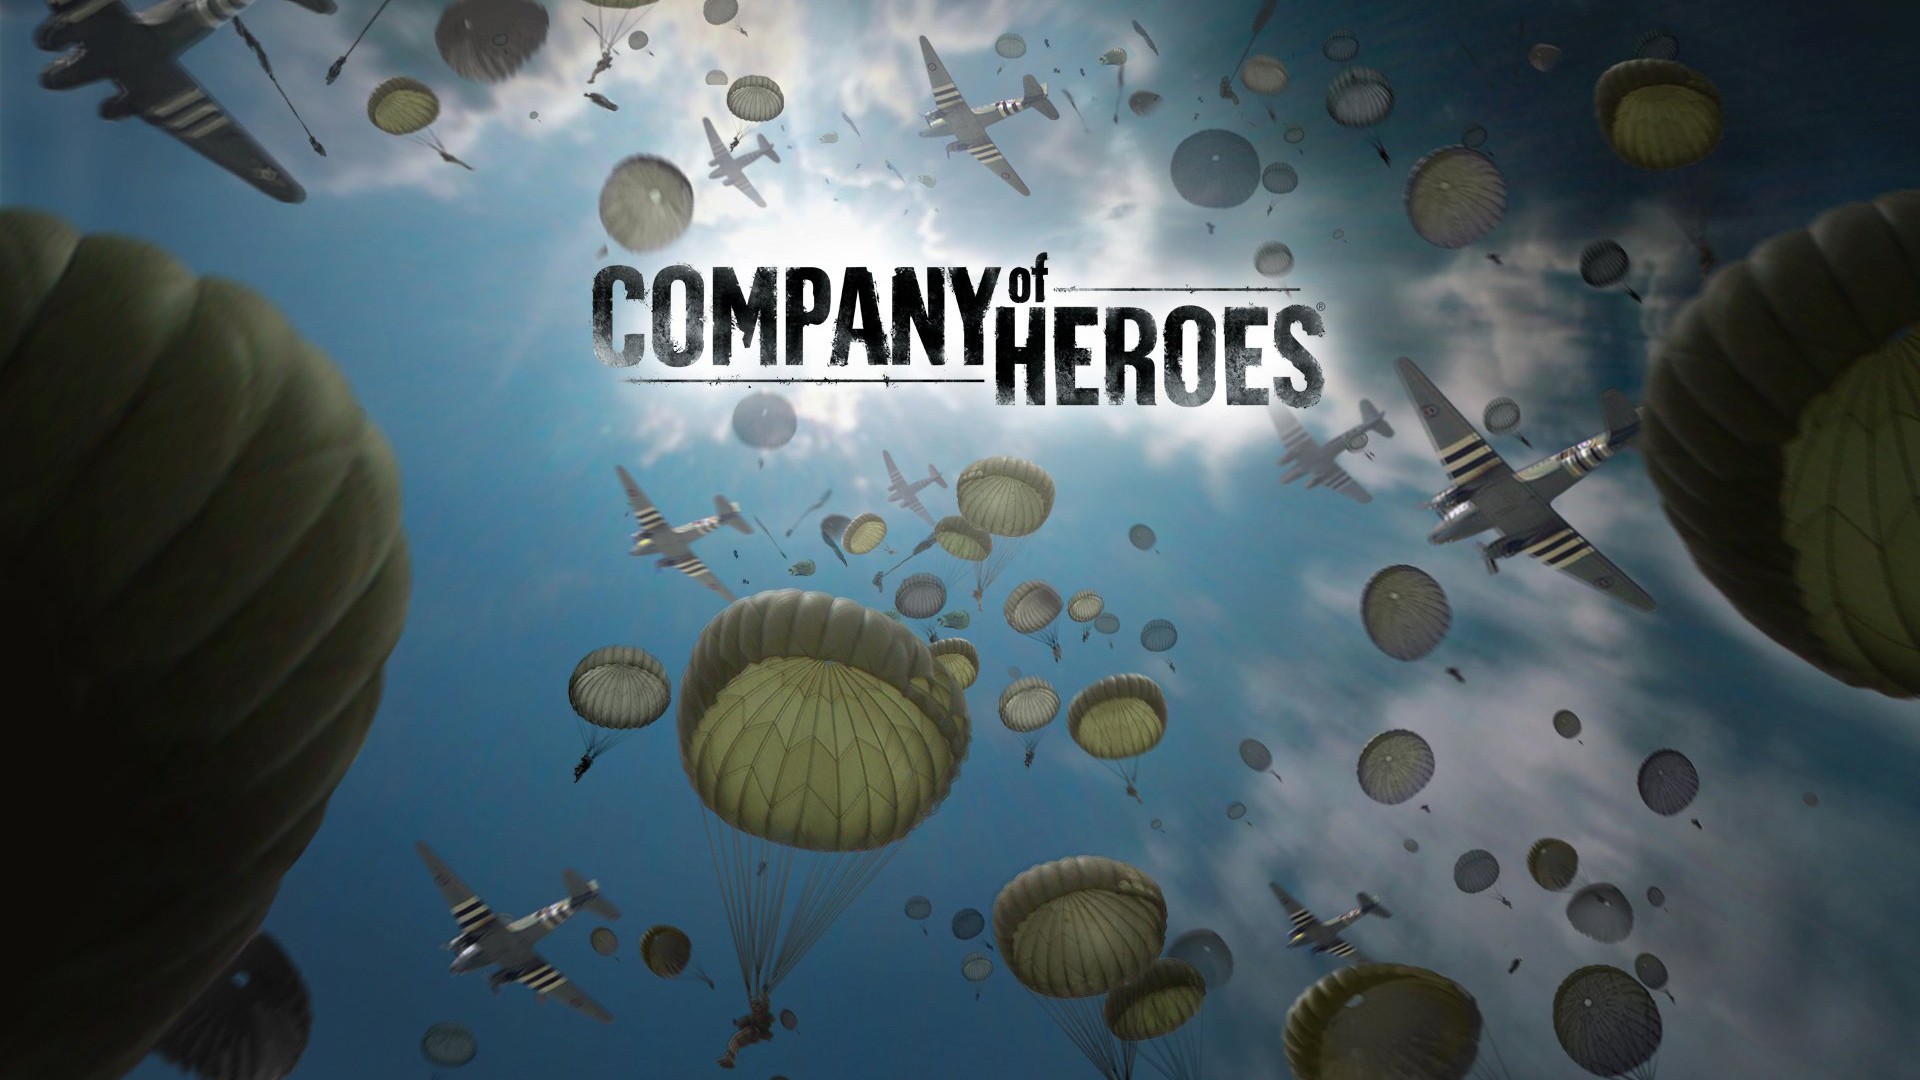 Video Game Company Of Heroes 1920x1080